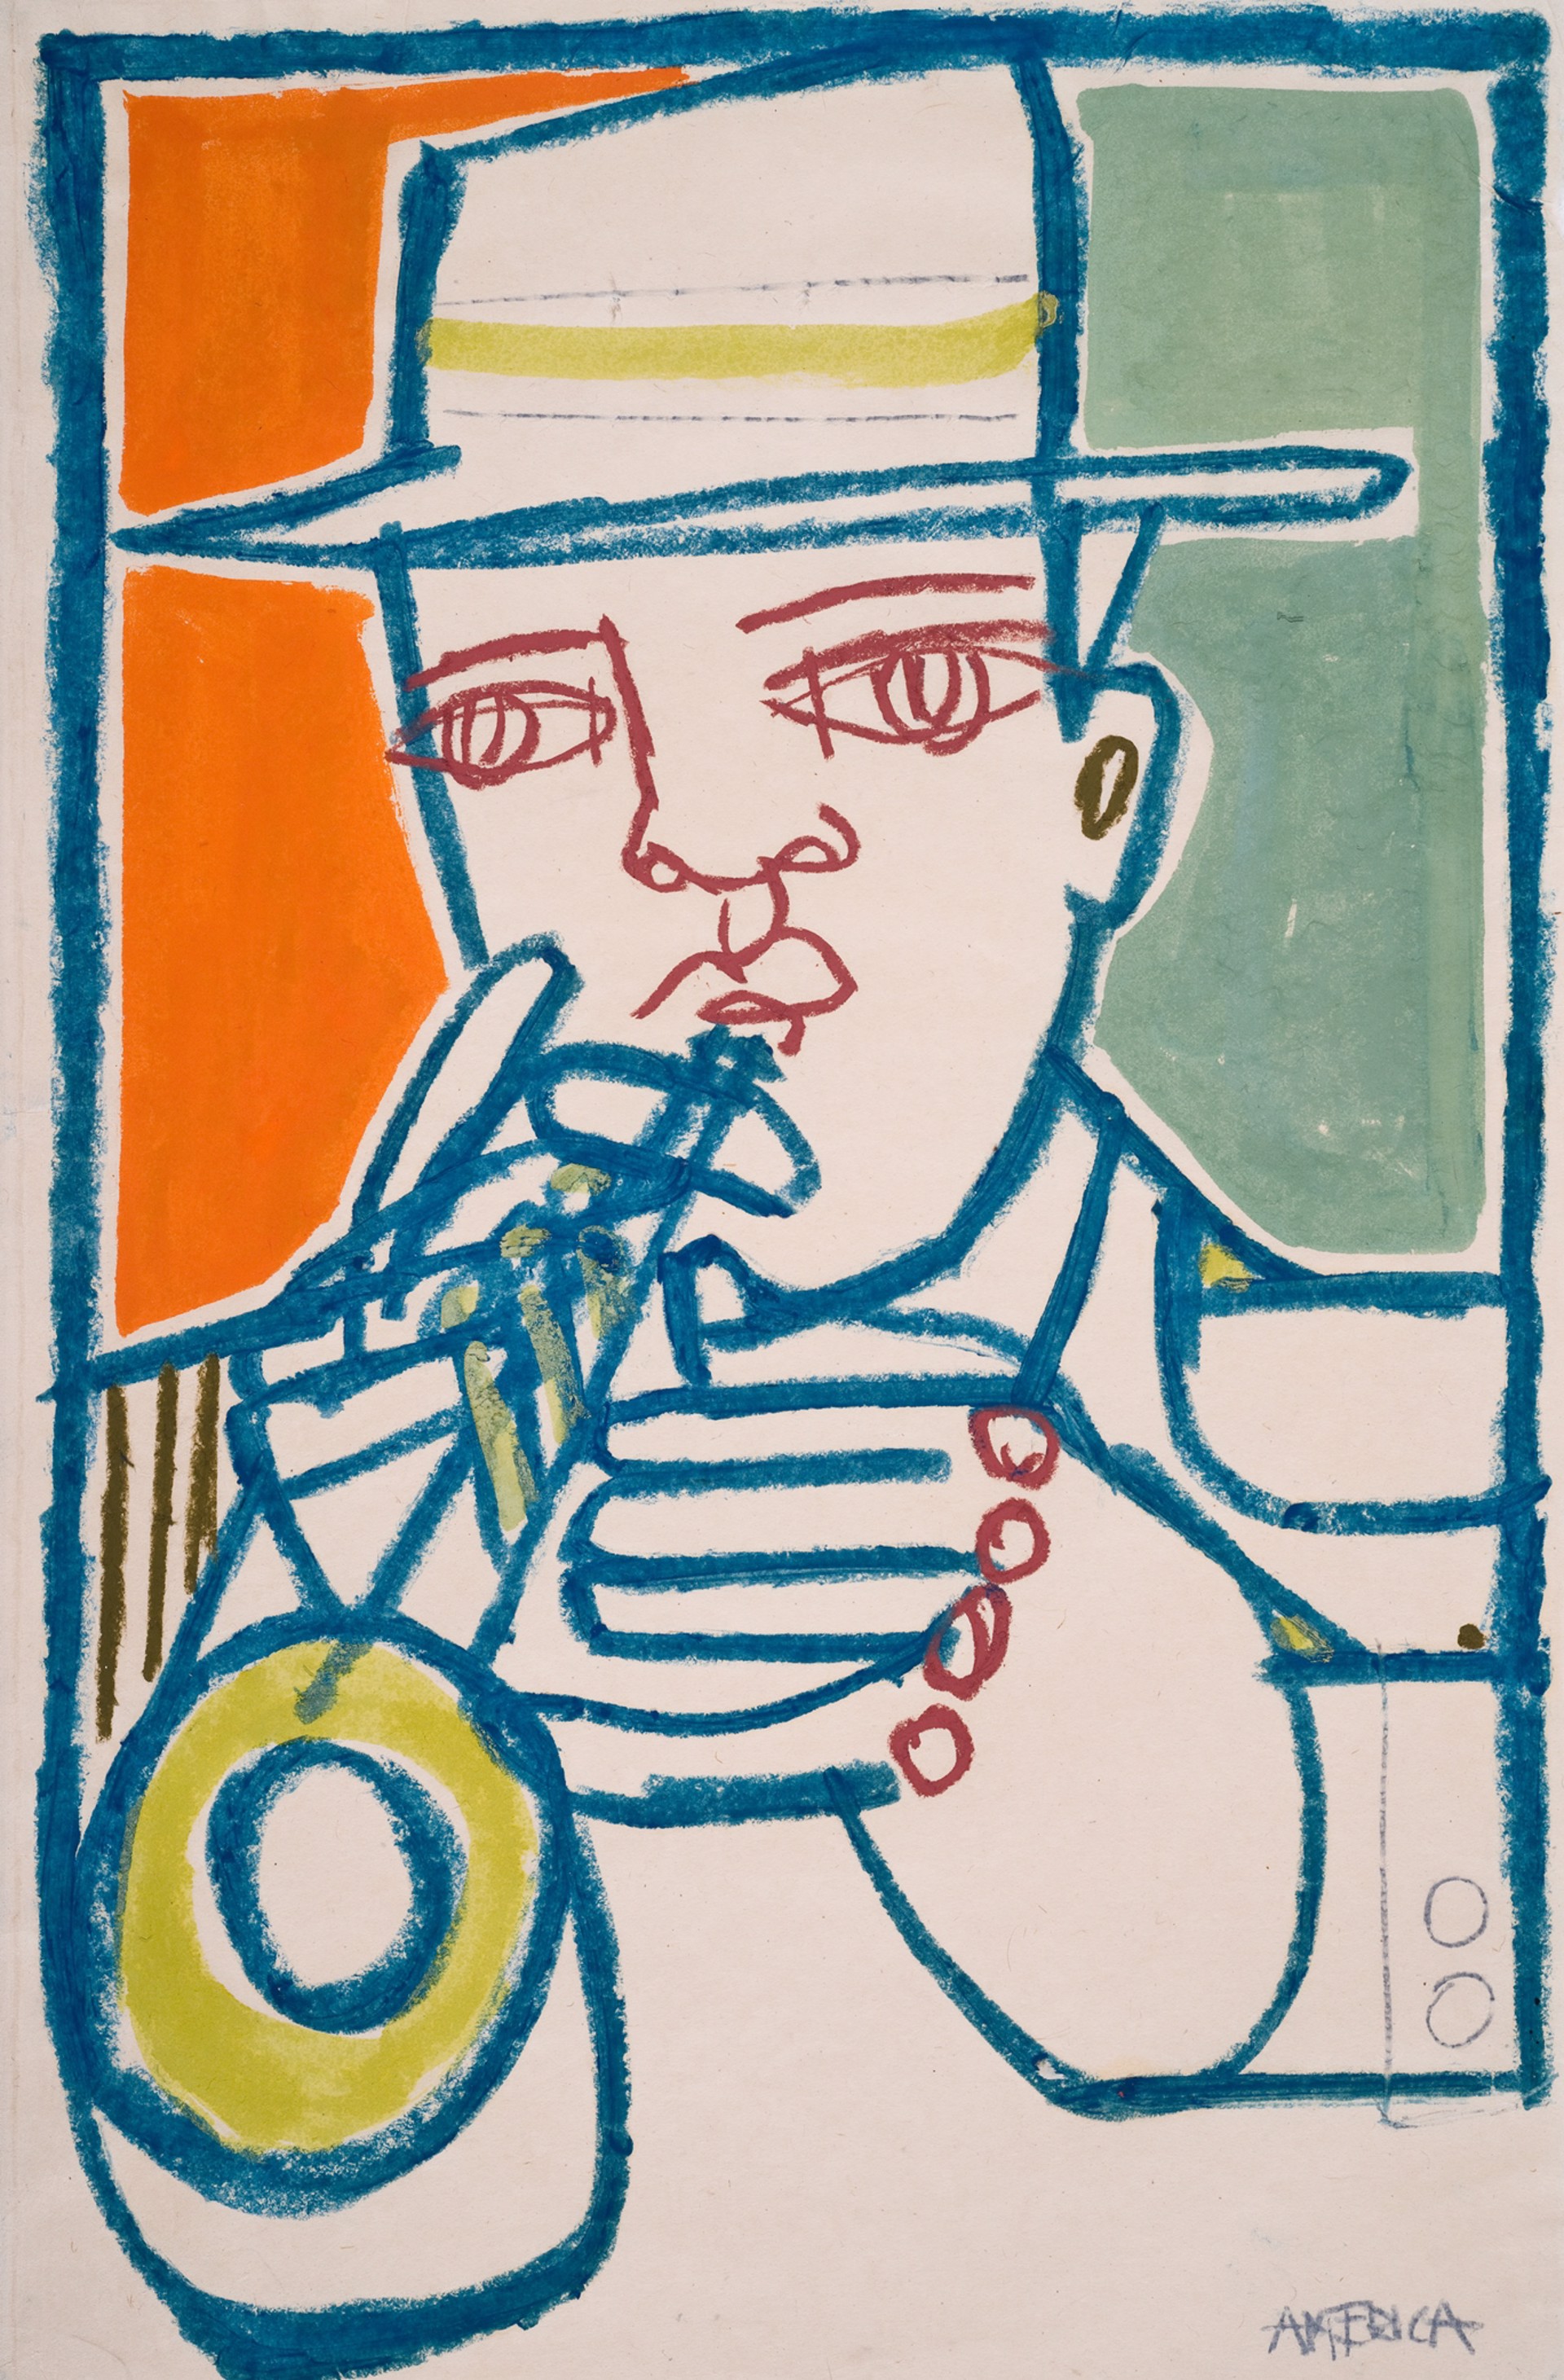 MAN WITH TRUMPET AND GREEN HAT by AMERICA MARTIN